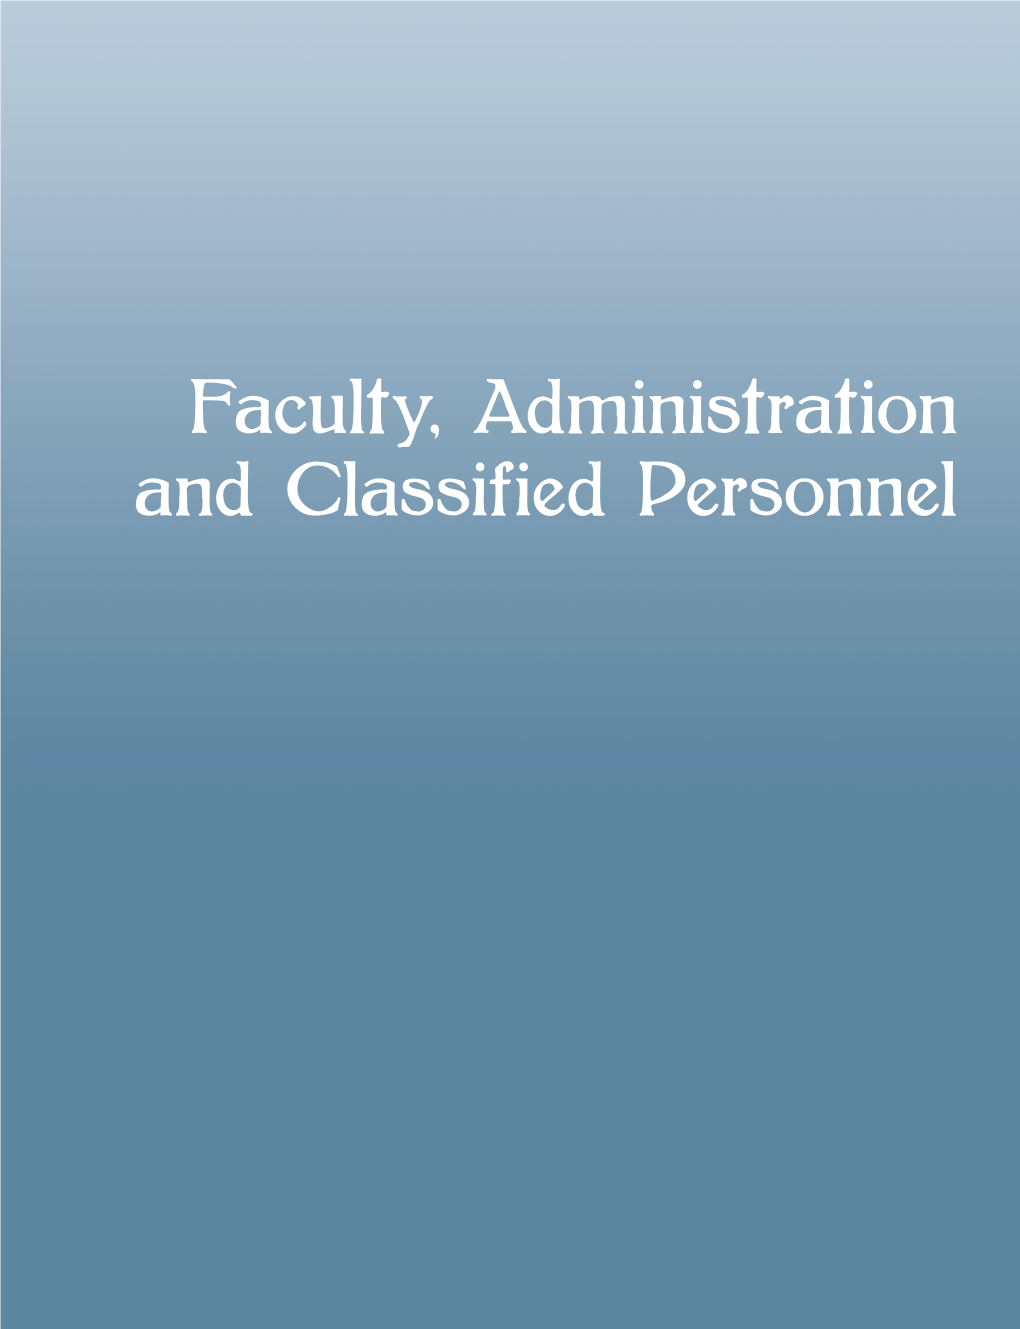 Faculty, Administration and Classified Personnel